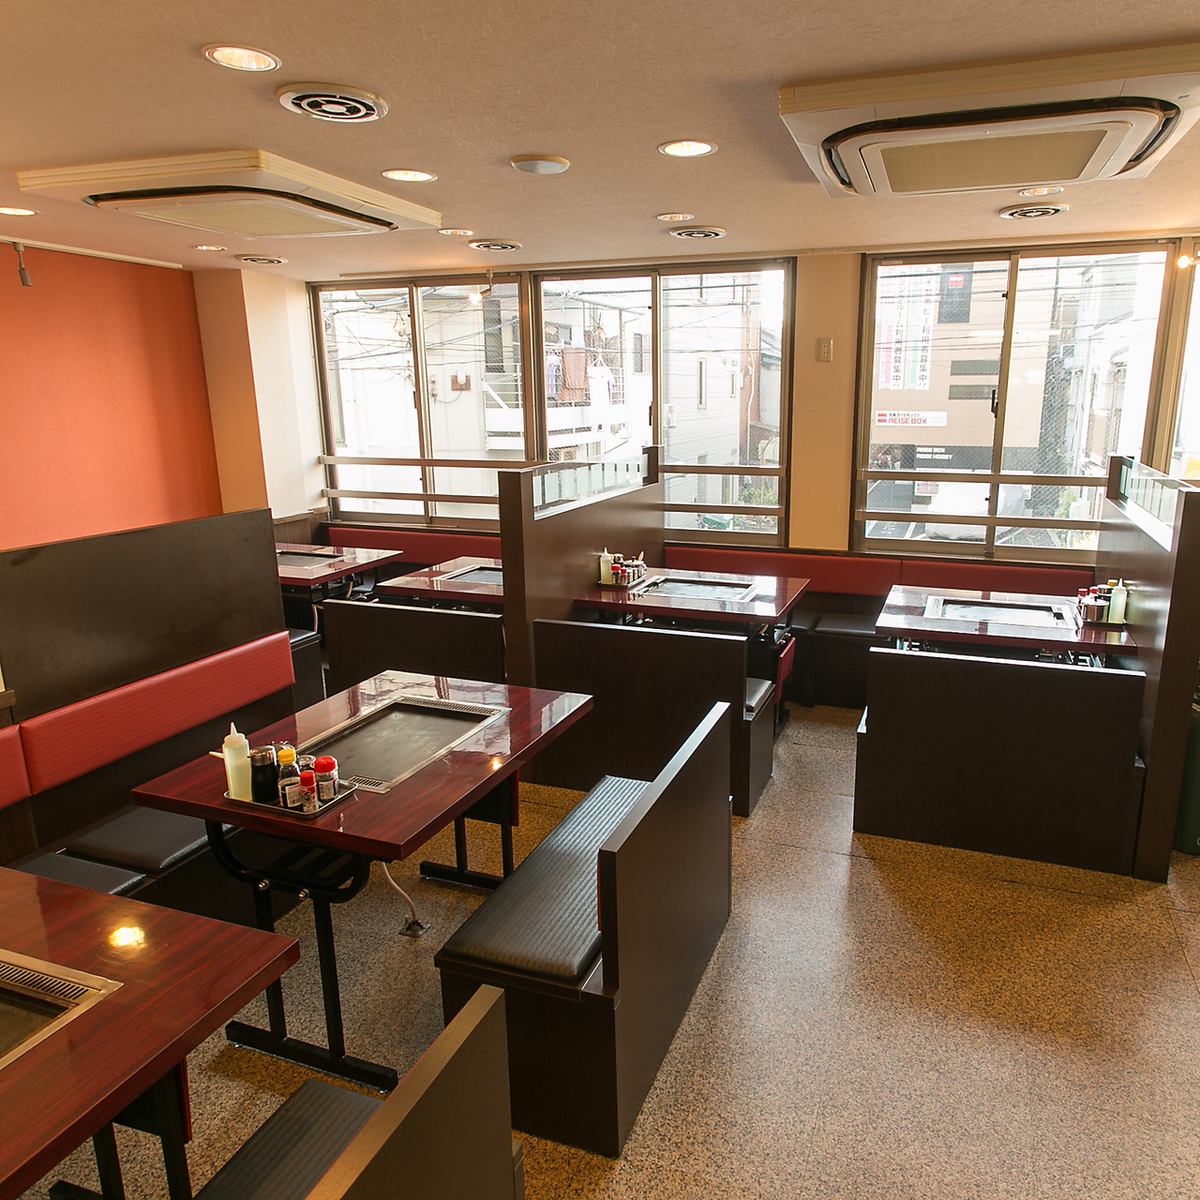 2 minutes walk from Tsukishima station ♪ The second floor is for over 30 people and can be reserved for private use!